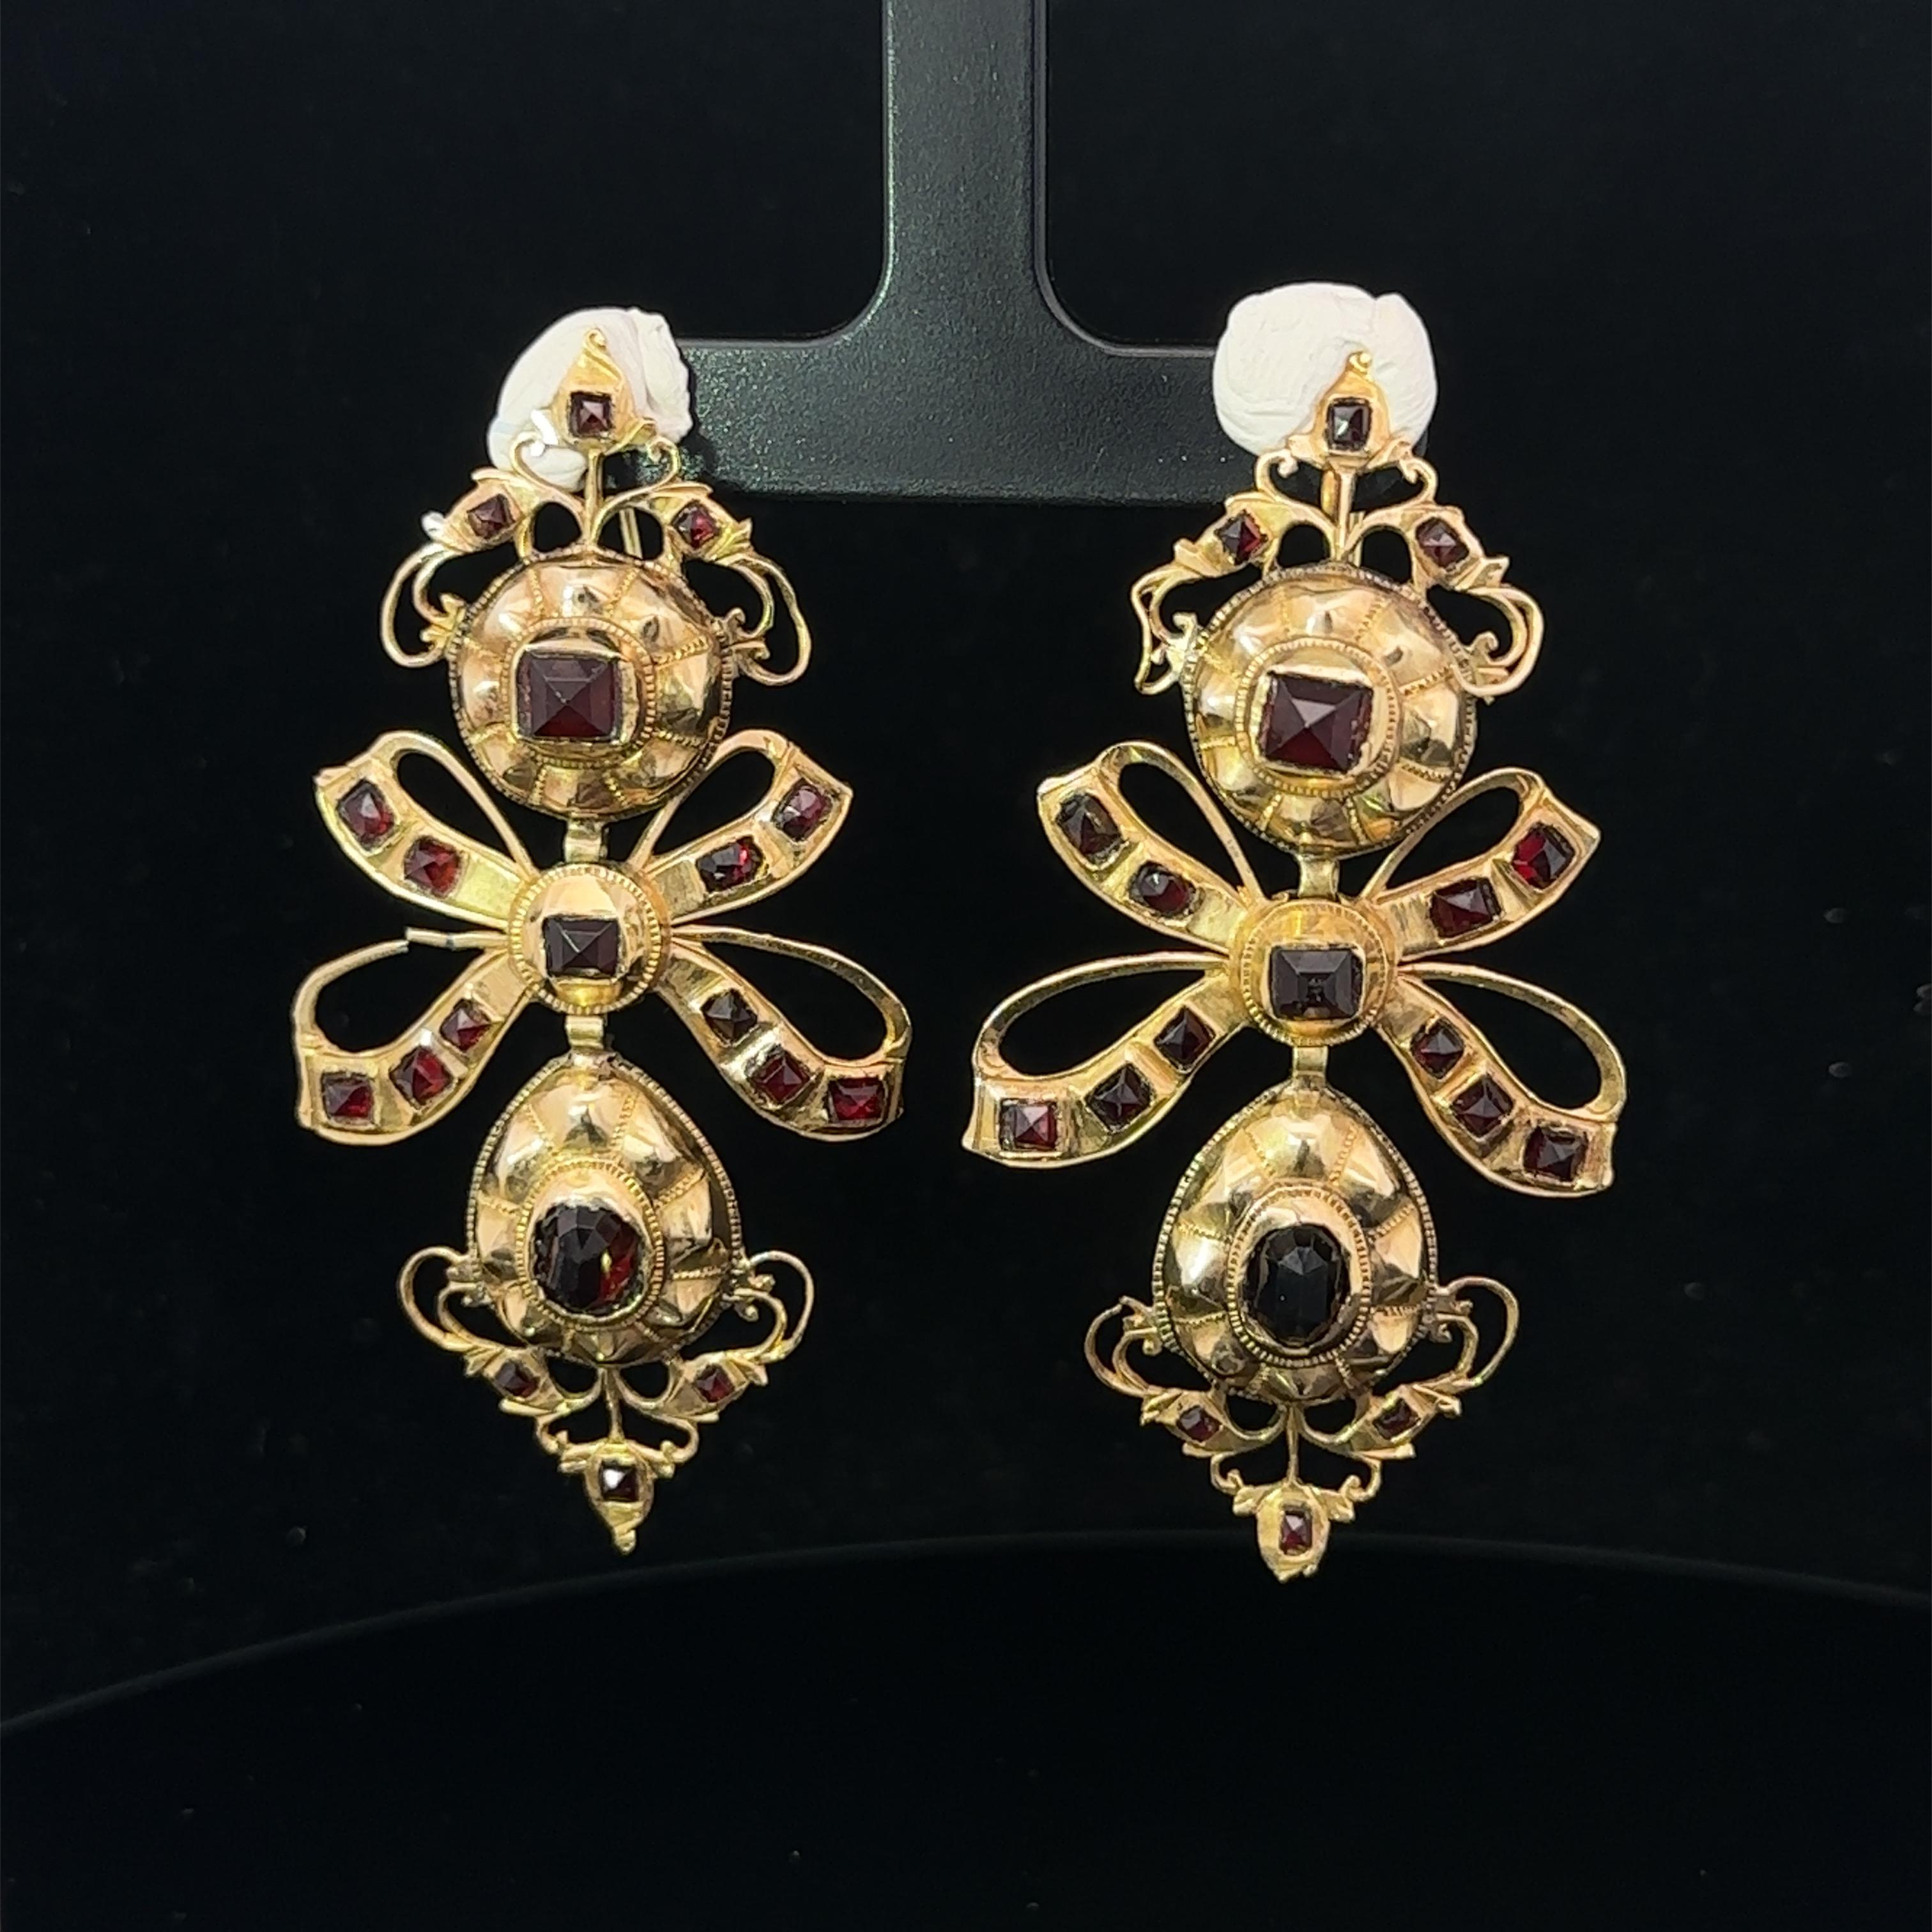 Antique 18k Spanish Gold Red Garnet Pendant Earrings 18th Century  In Good Condition For Sale In London, GB